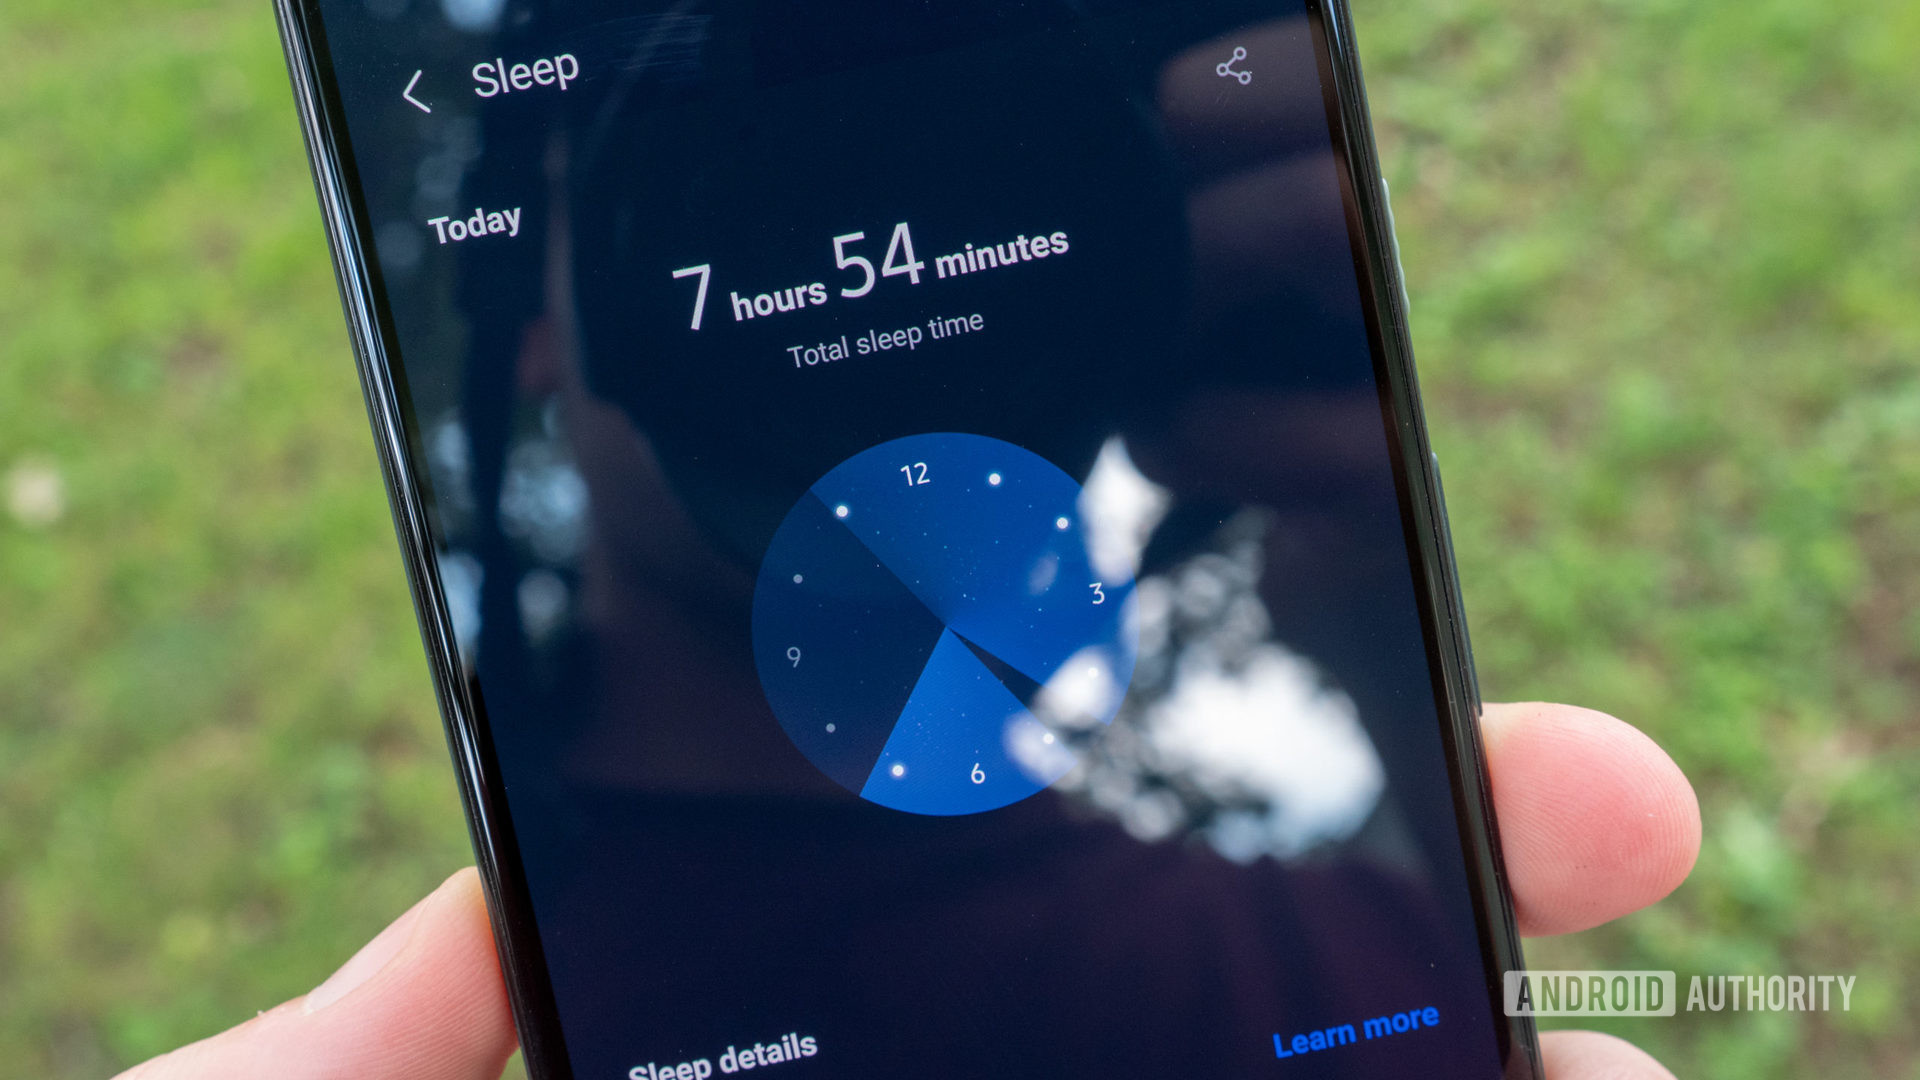 The Samsung Health app showing sleep tracking from the Samsung Galaxy Watch 4.